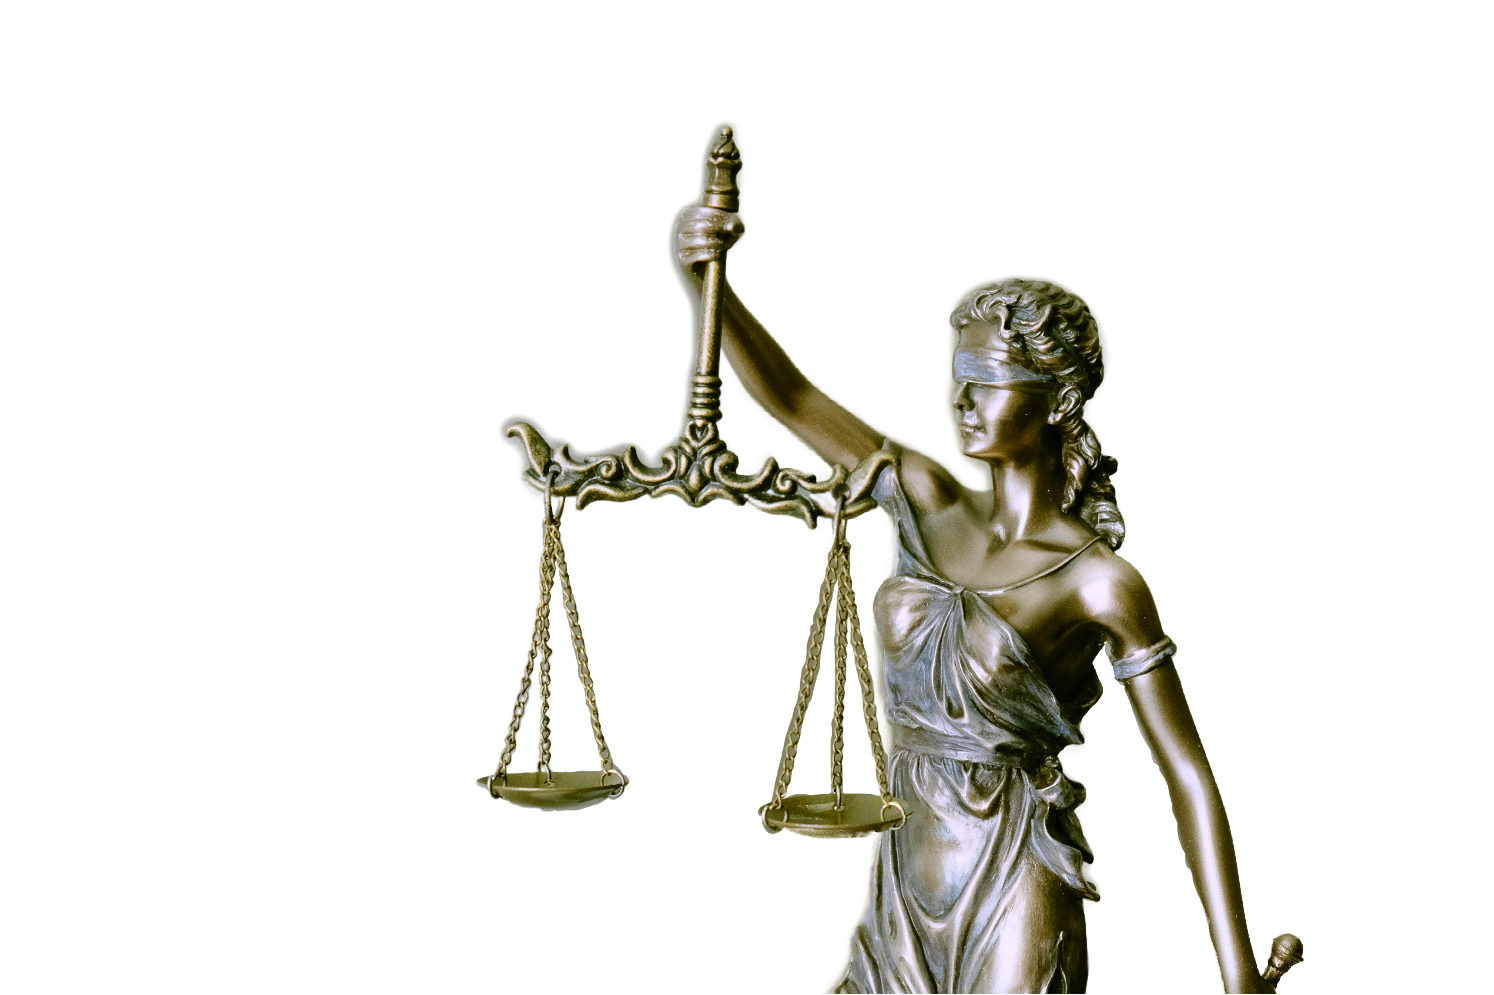 Background image of Lady Justice